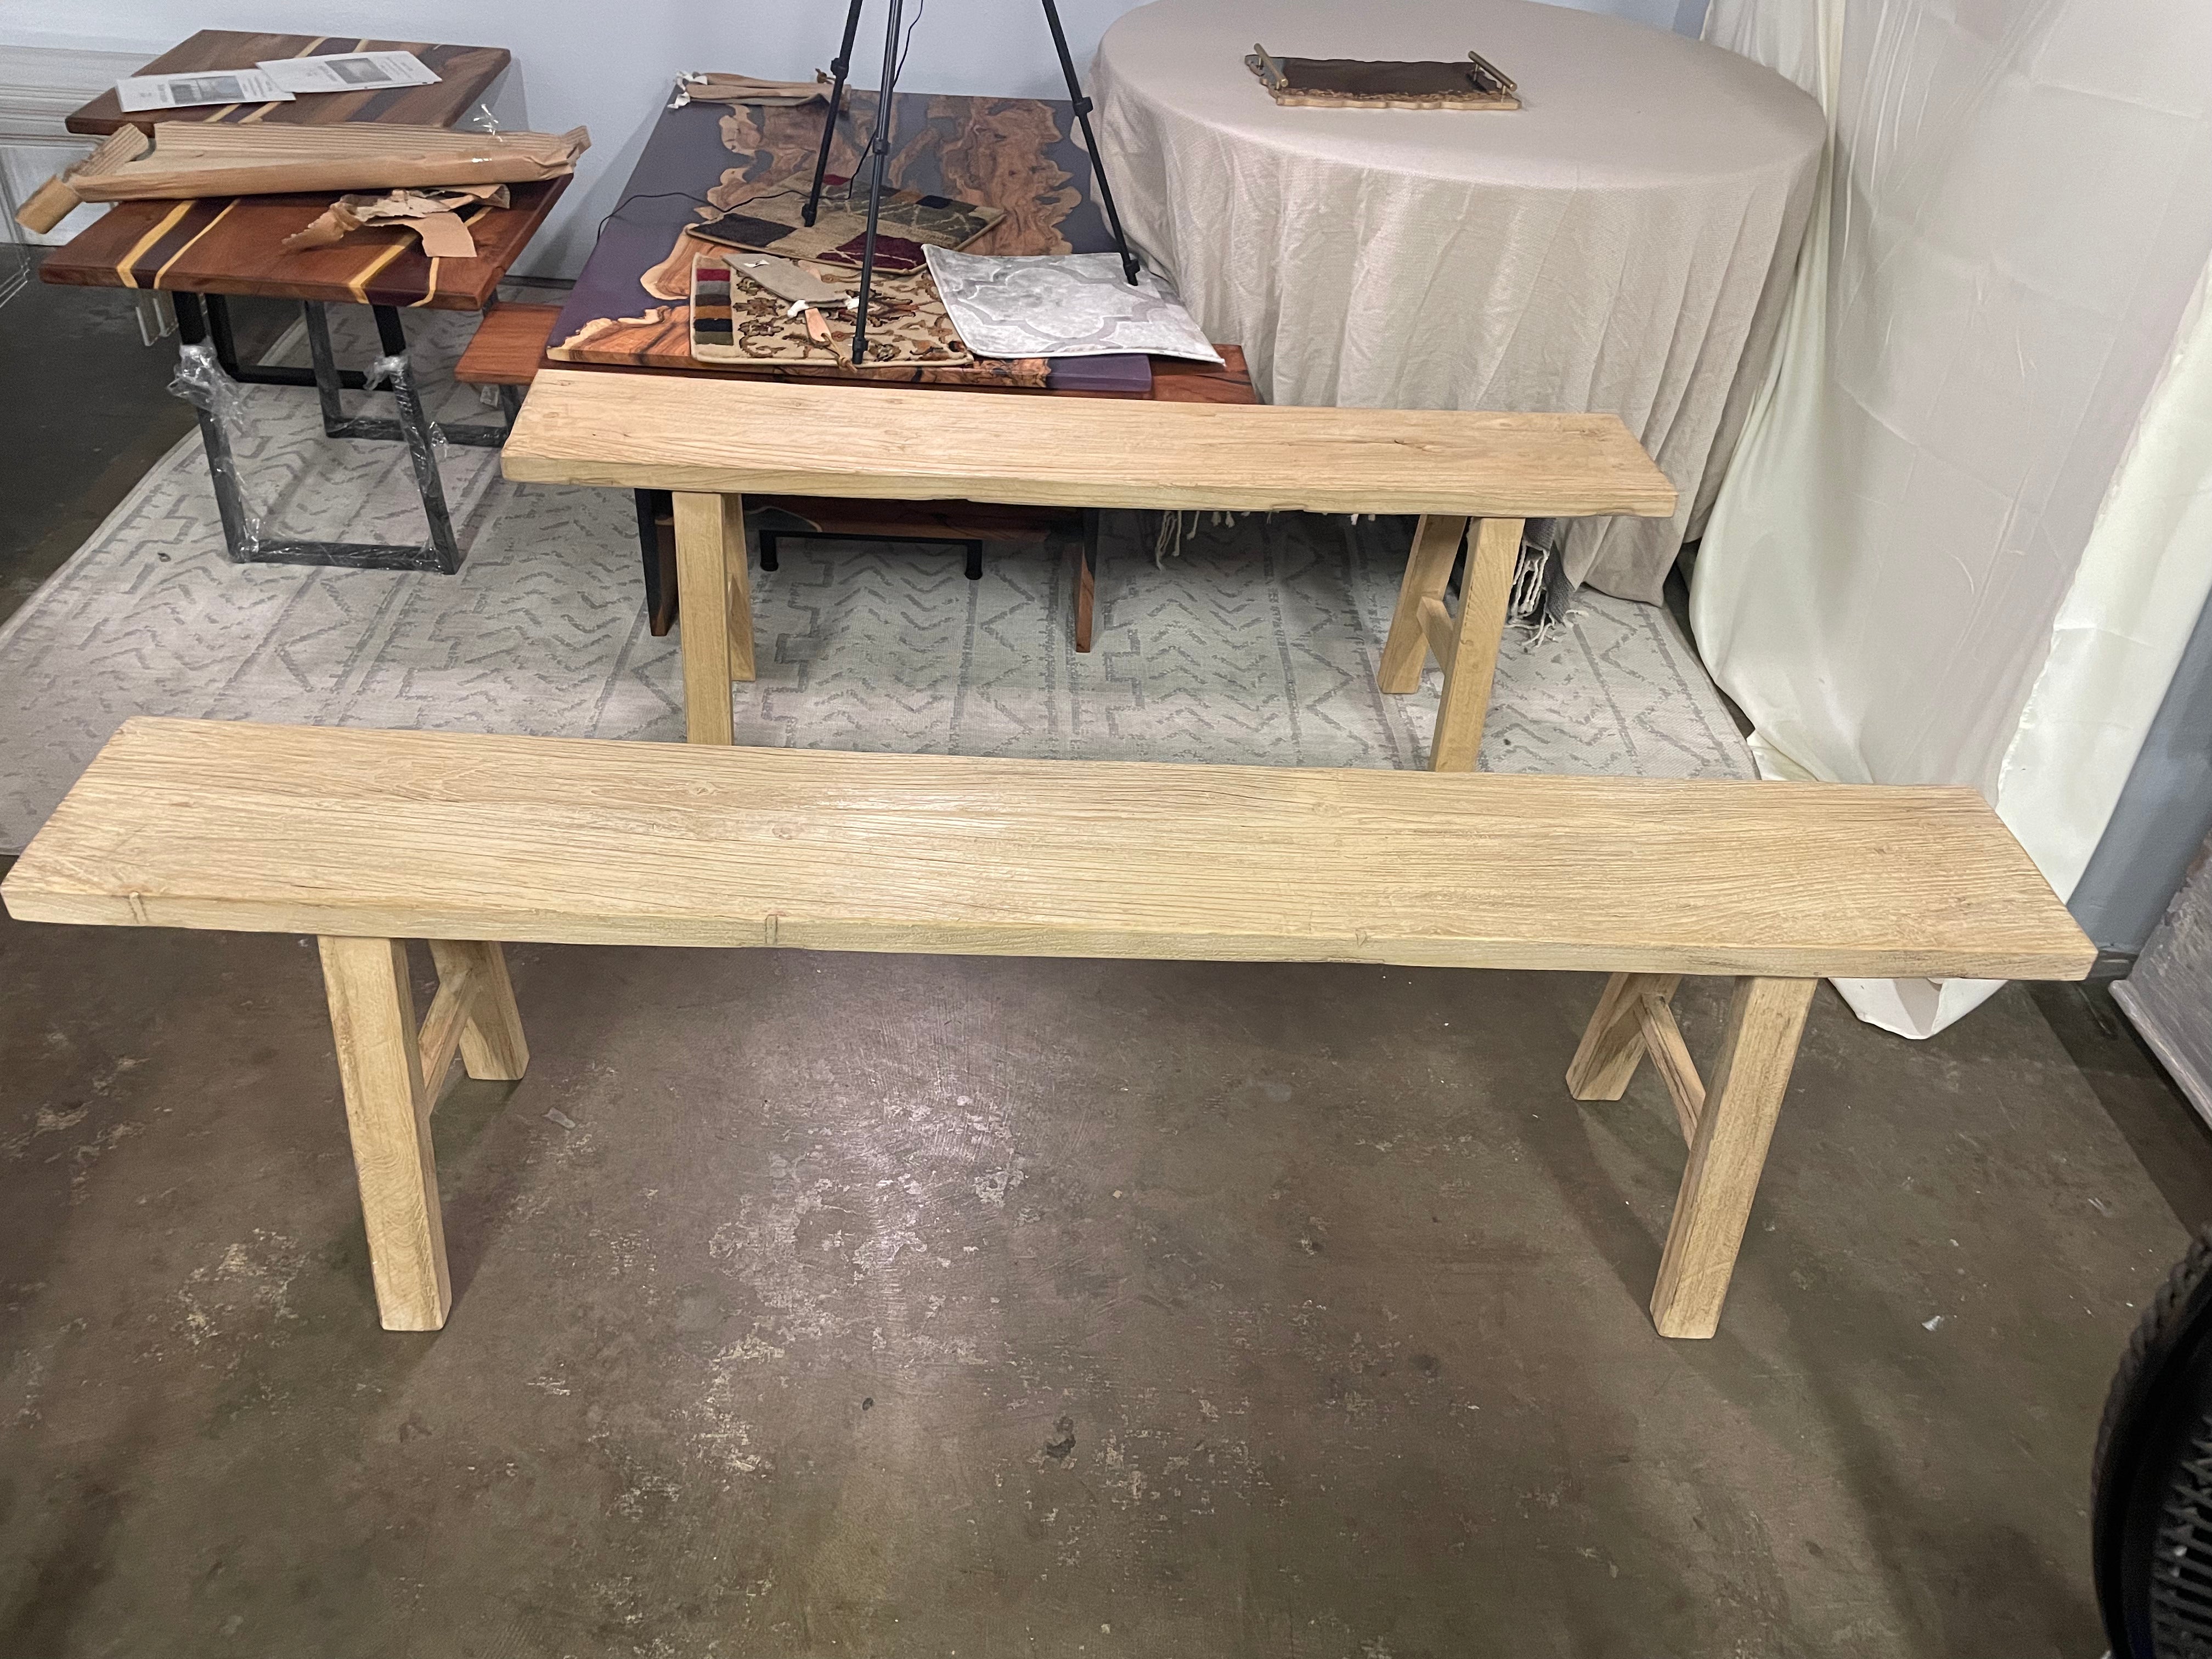 Handmade Reclaimed Wide Elm Wood Bench / Long Solid Wood Bench / Vintage Style